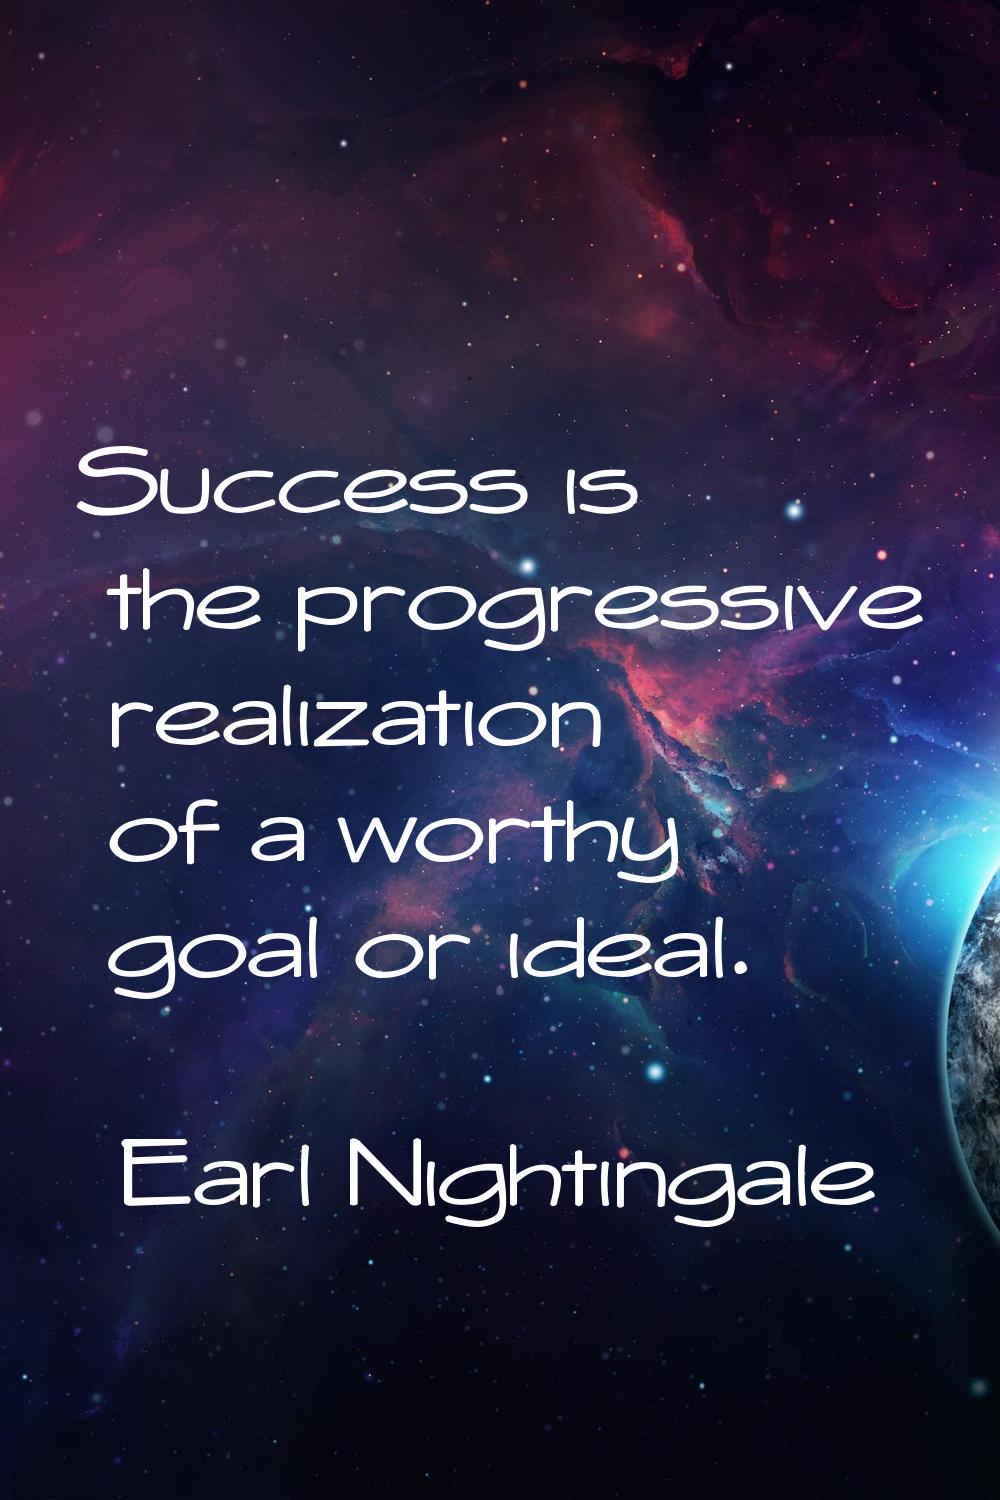 Success is the progressive realization of a worthy goal or ideal.